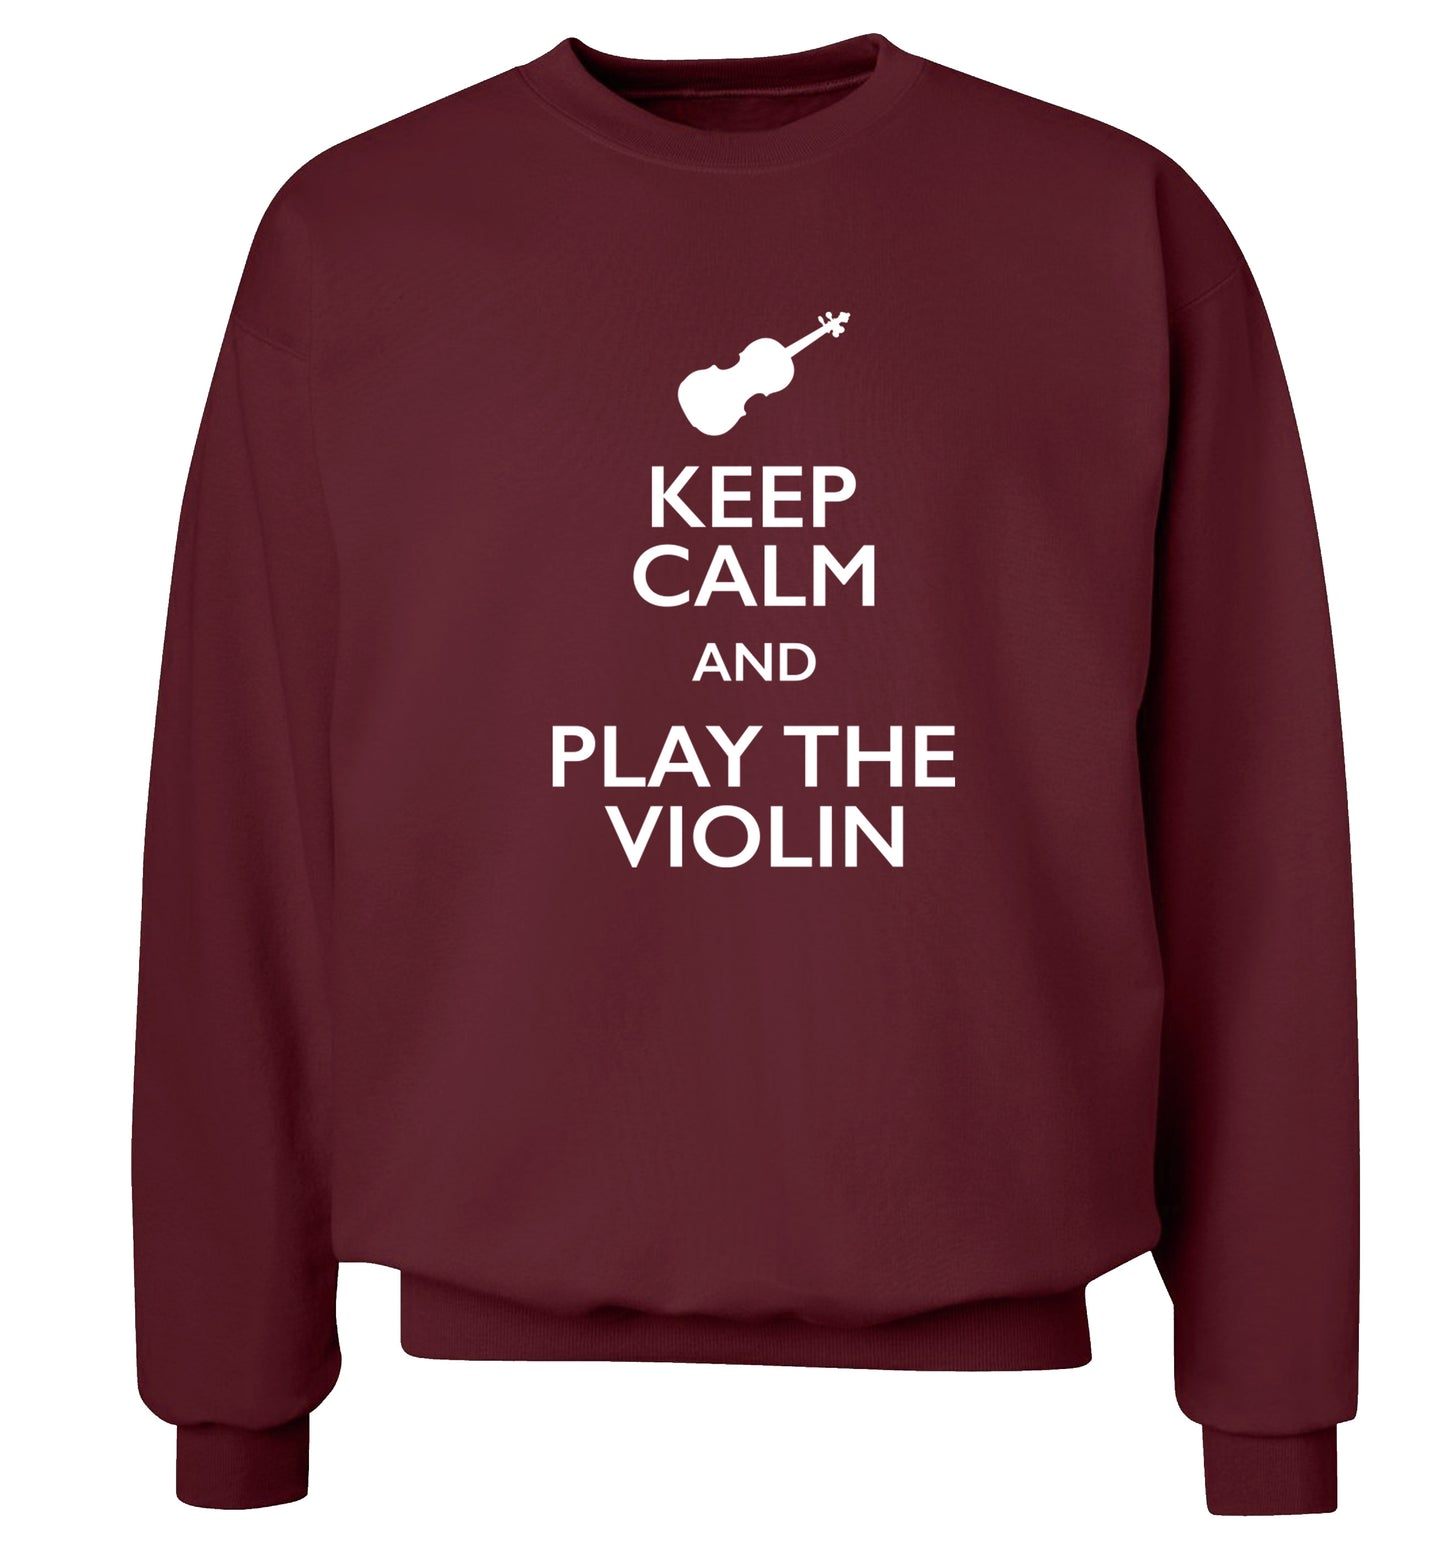 Keep calm and play the violin Adult's unisex maroon Sweater 2XL